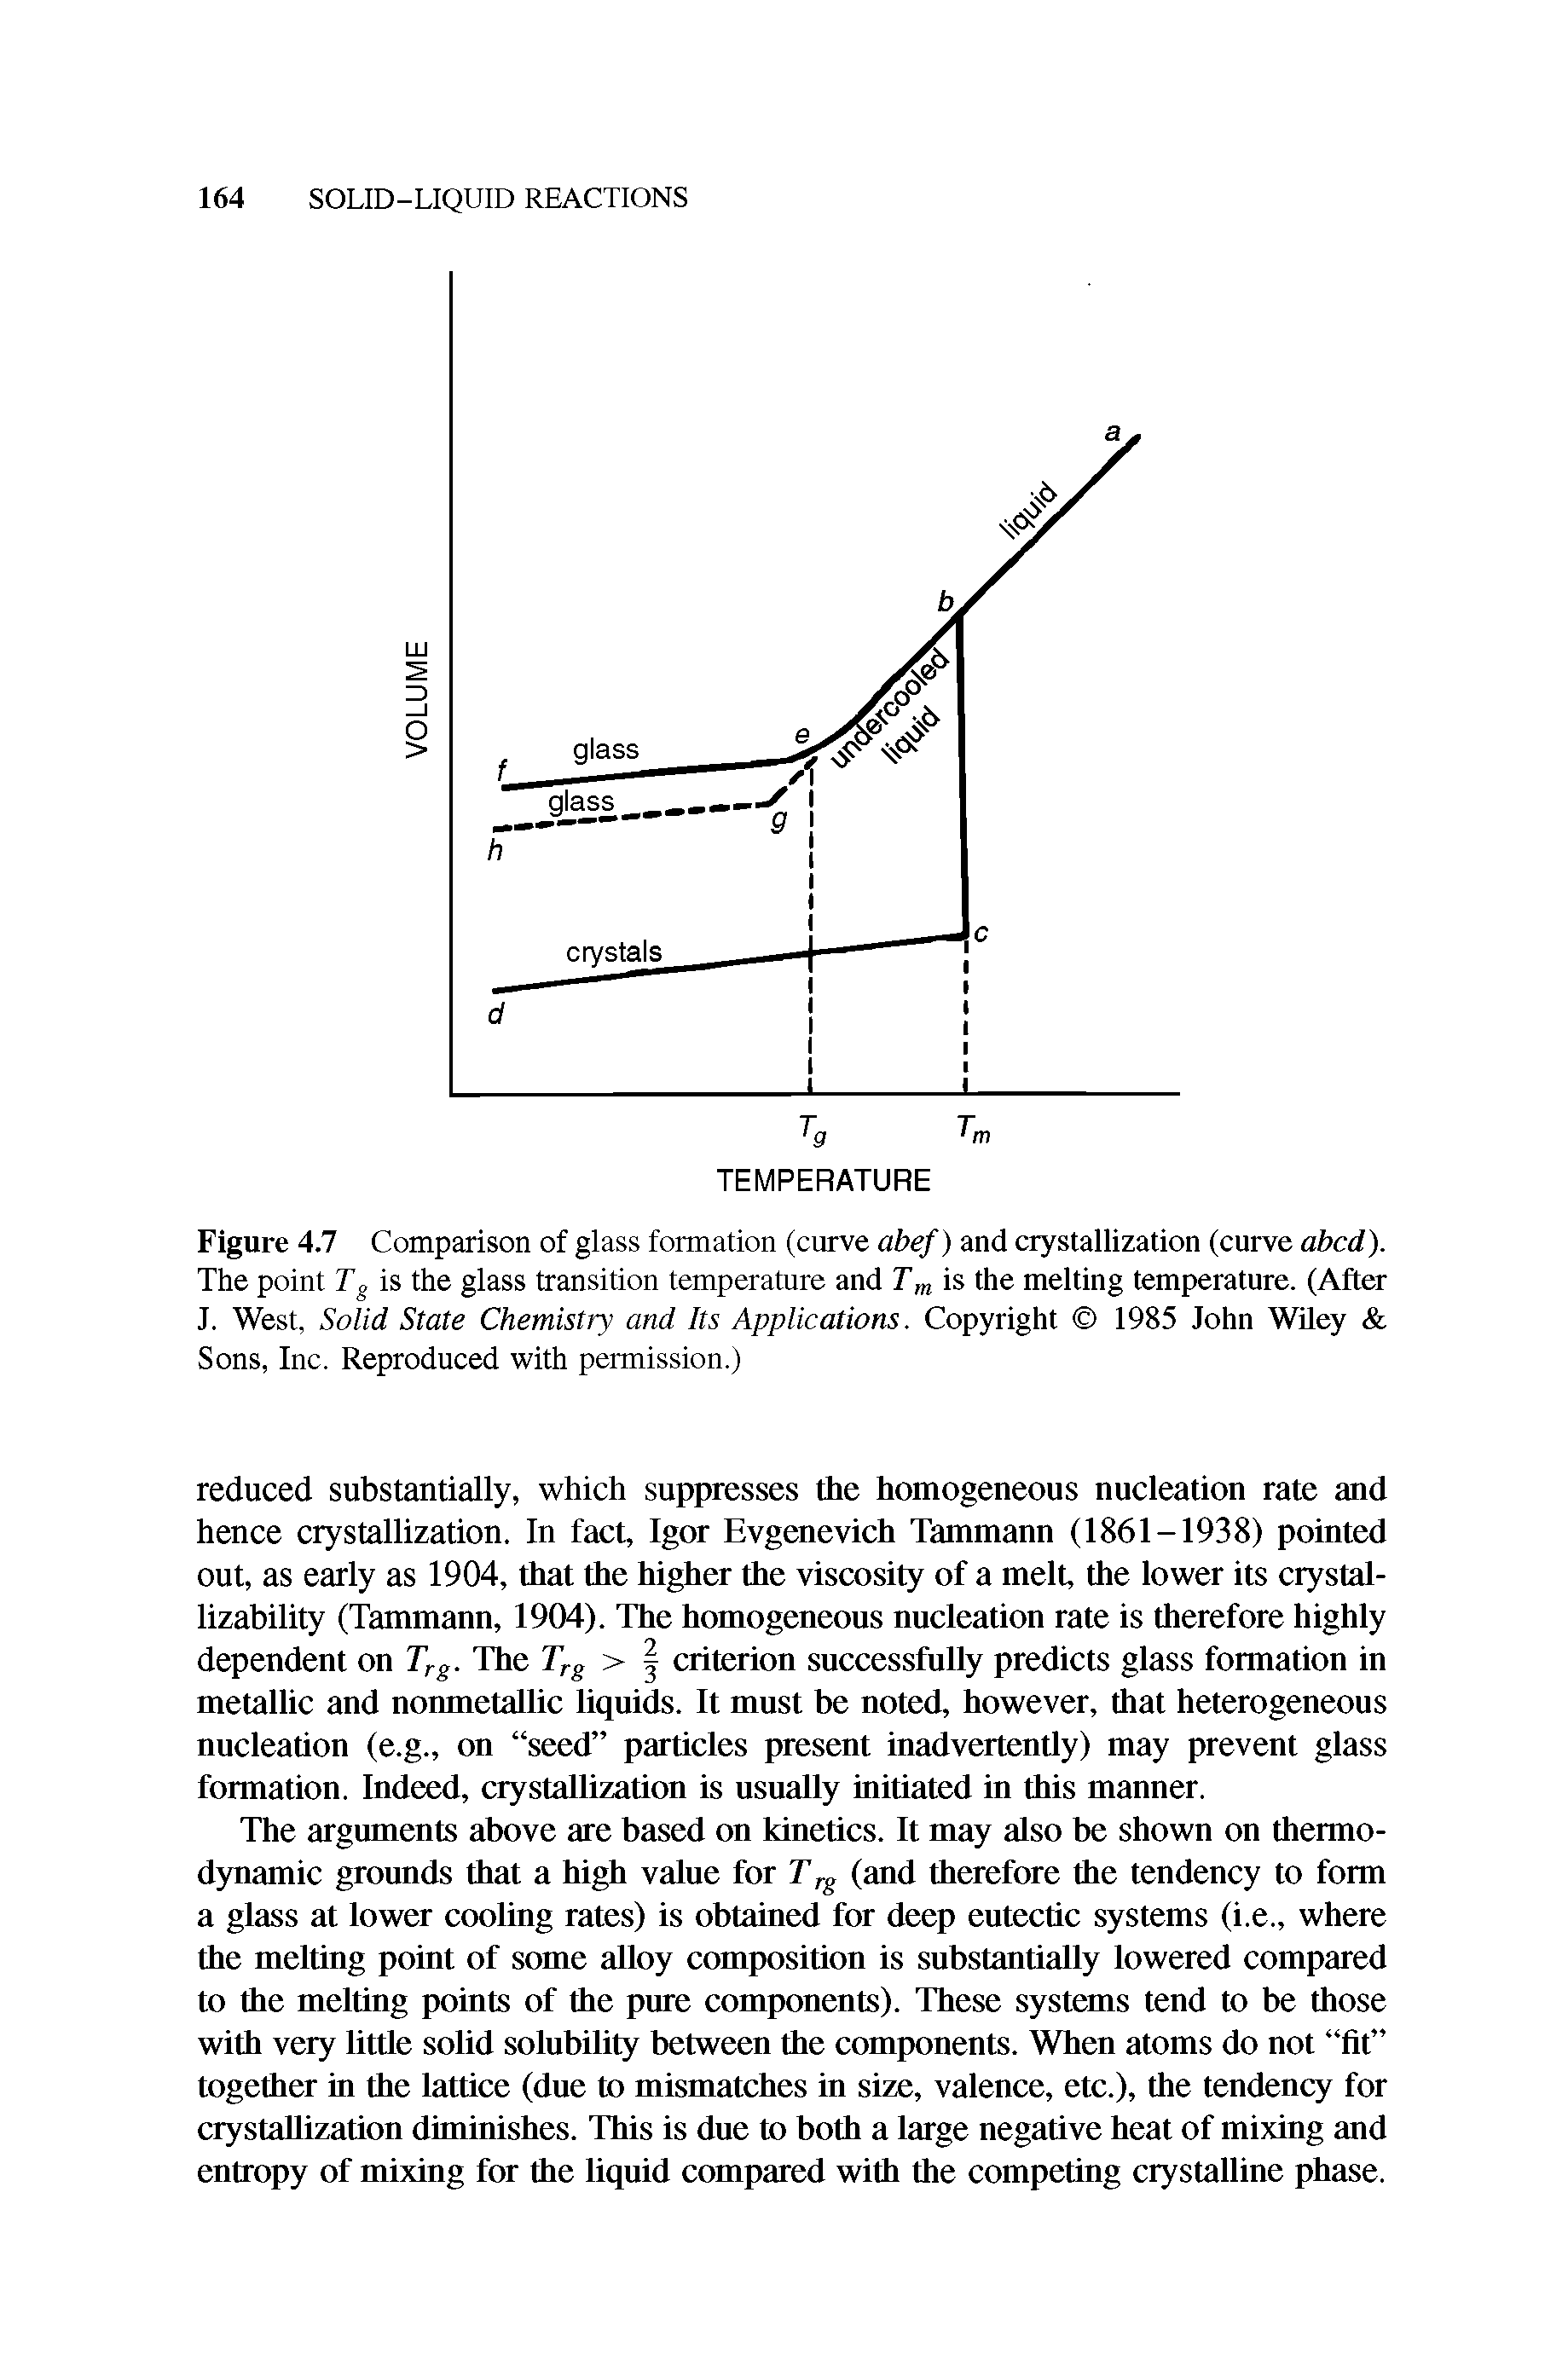 Figure 4.7 Comparison of glass formation (curve abef ) and crystallization (curve abed). The point T, is the glass transition temperature and Tm is the melting temperature. (After J. West, Solid State Chemistry and Its Applications. Copyright 1985 John Wiley Sons, Inc. Reproduced with permission.)...